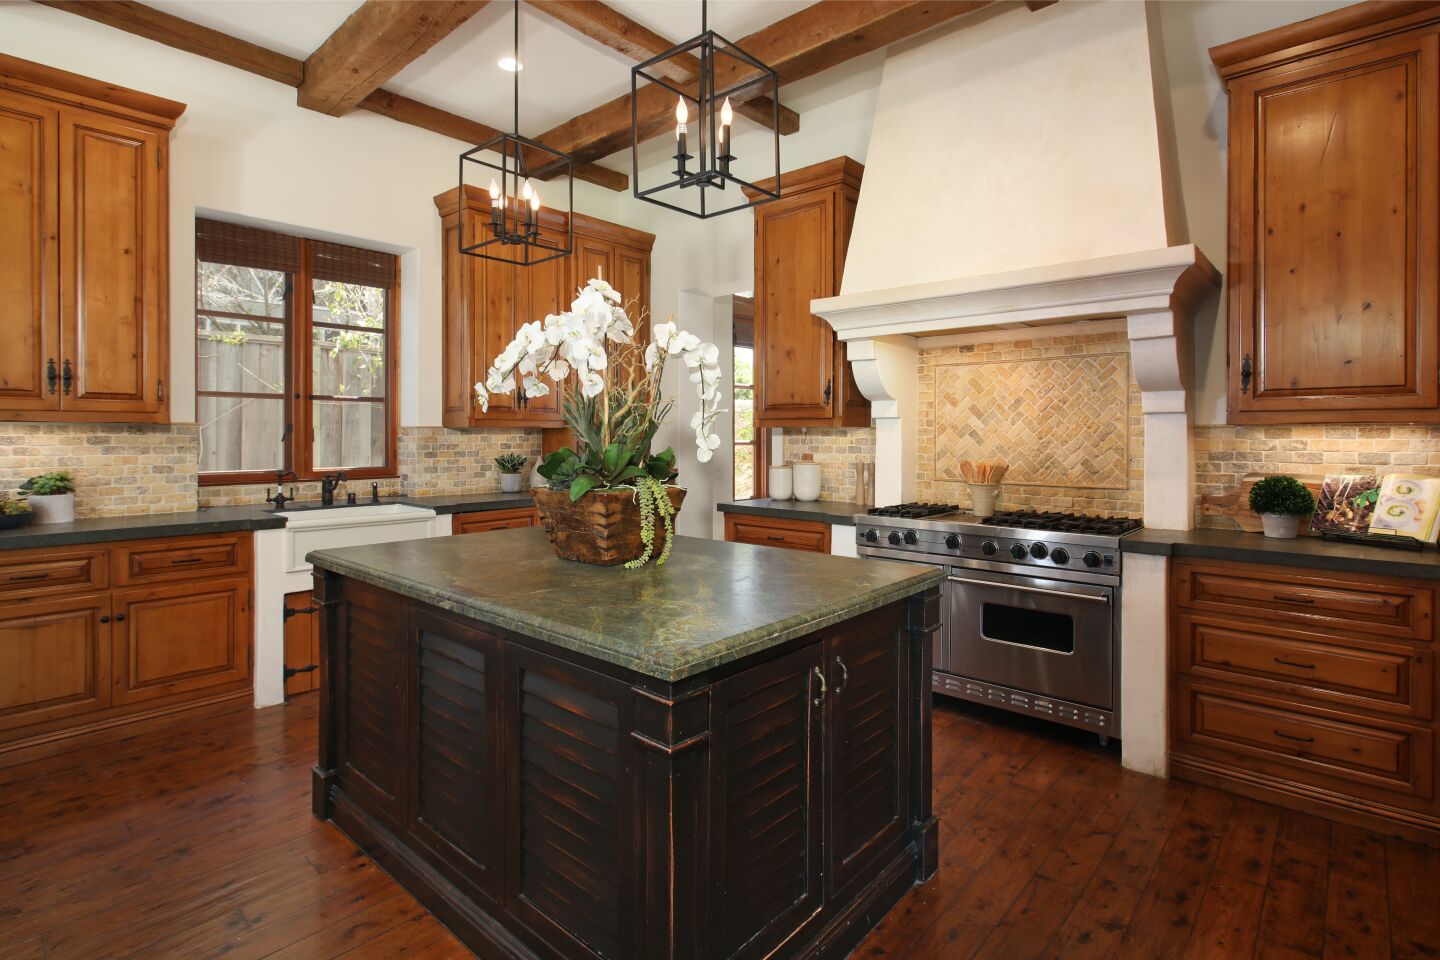 A large island, tile backsplash, wood cabinets and wood floor in the kitchen.